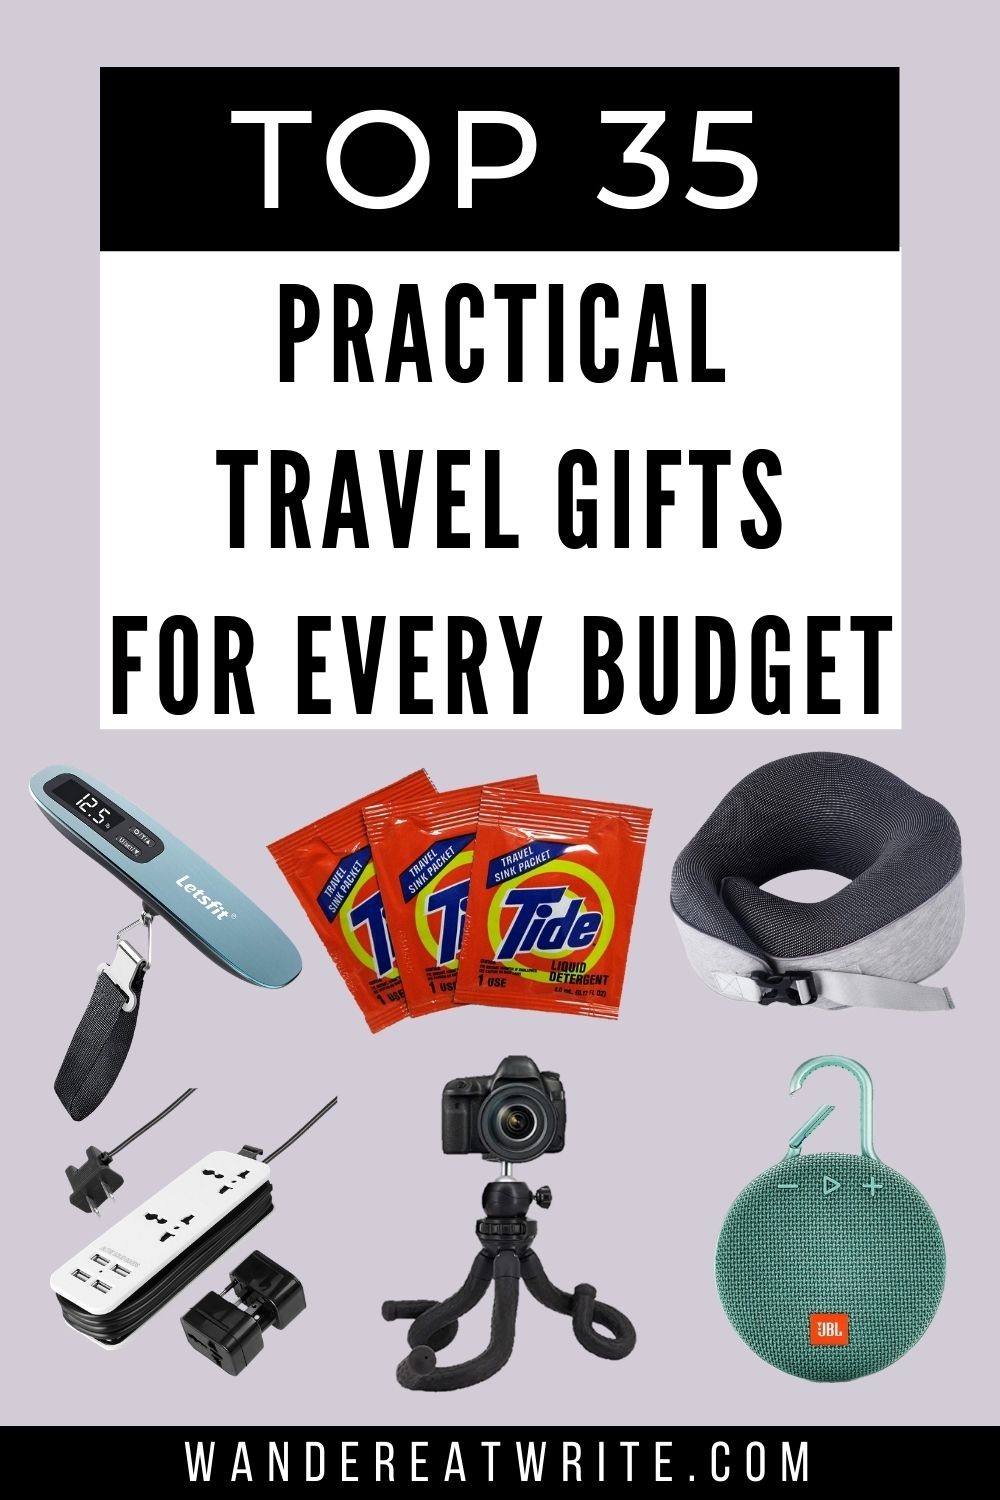 50 Best Gifts for Travelers: Unique Ideas for Every Budget